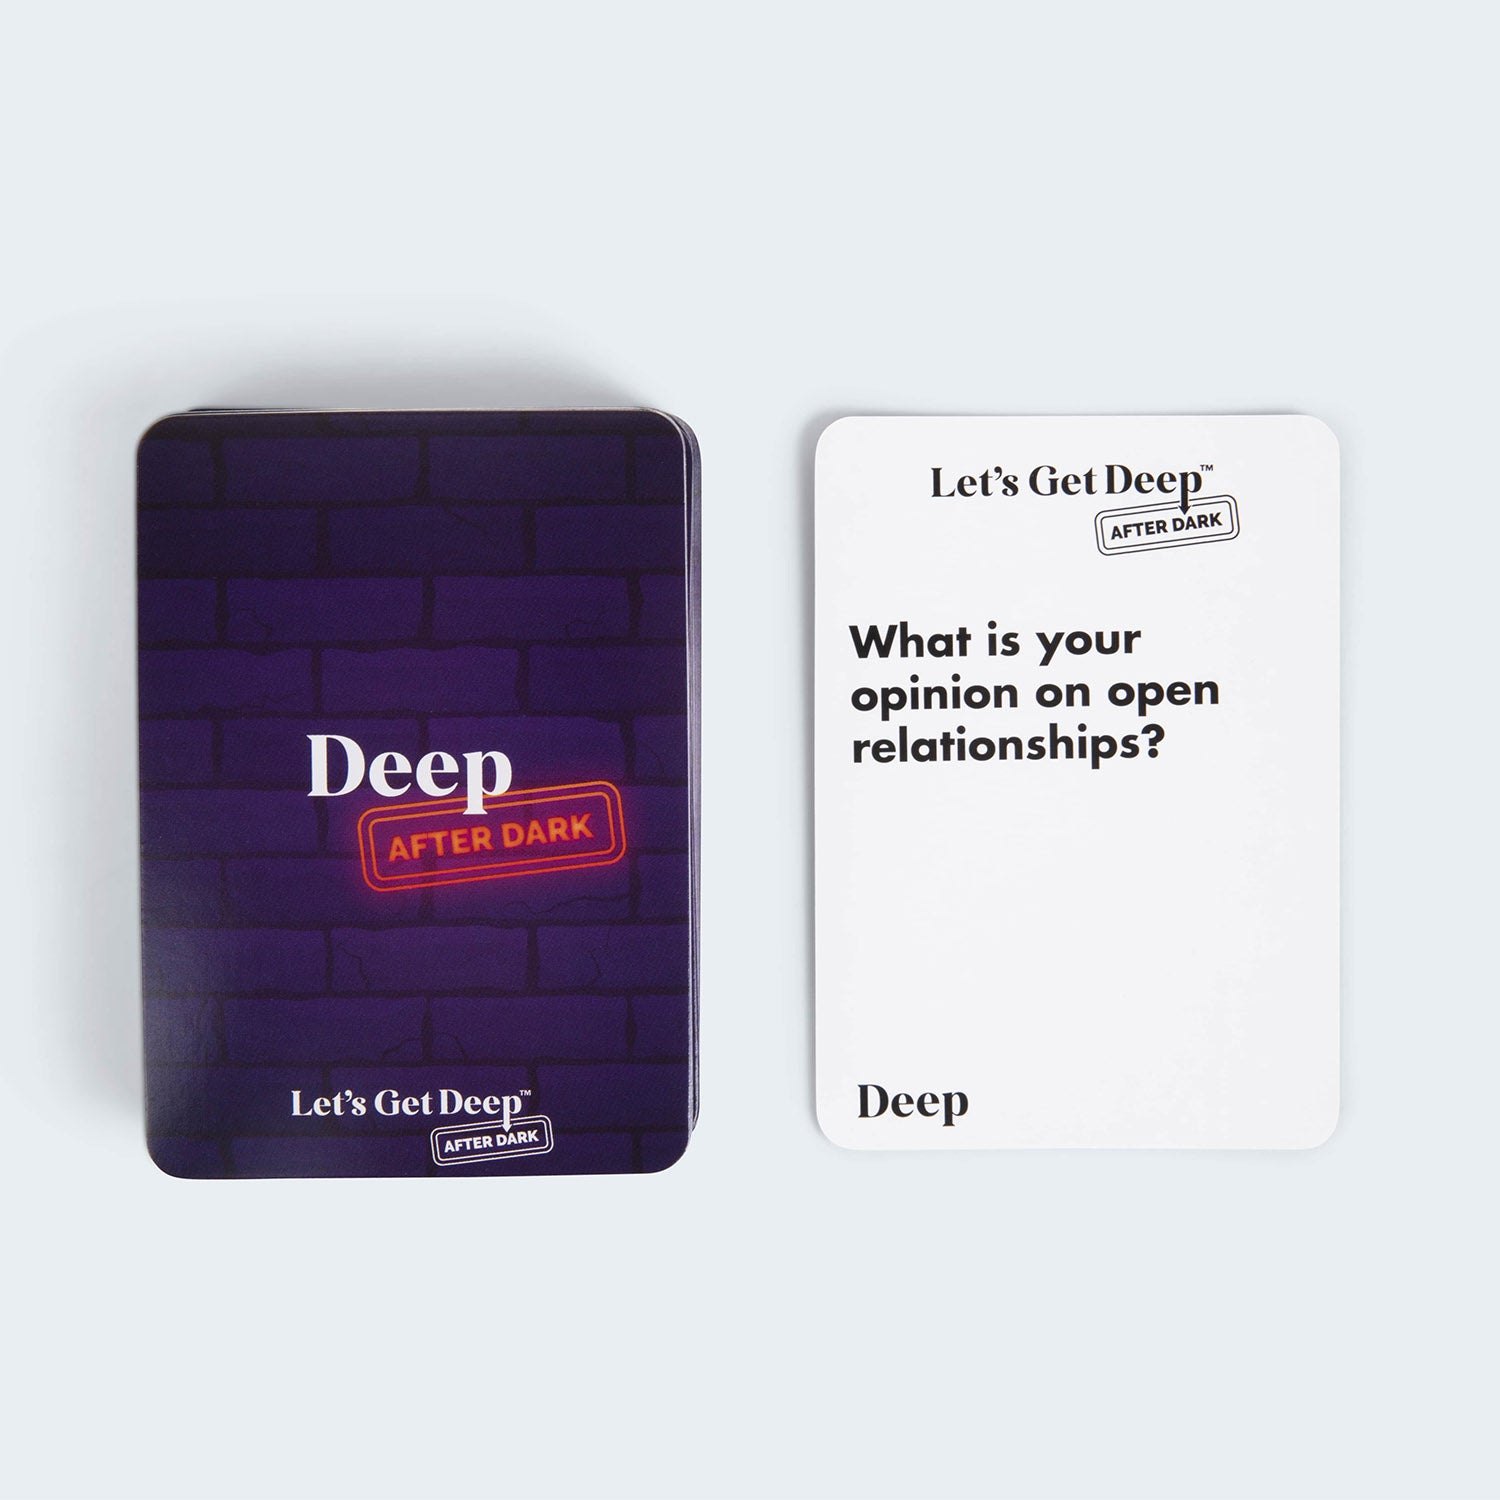 let-s-get-deep-after-dark-game-box-and-game-play-04-what-do-you-meme-by-relatable